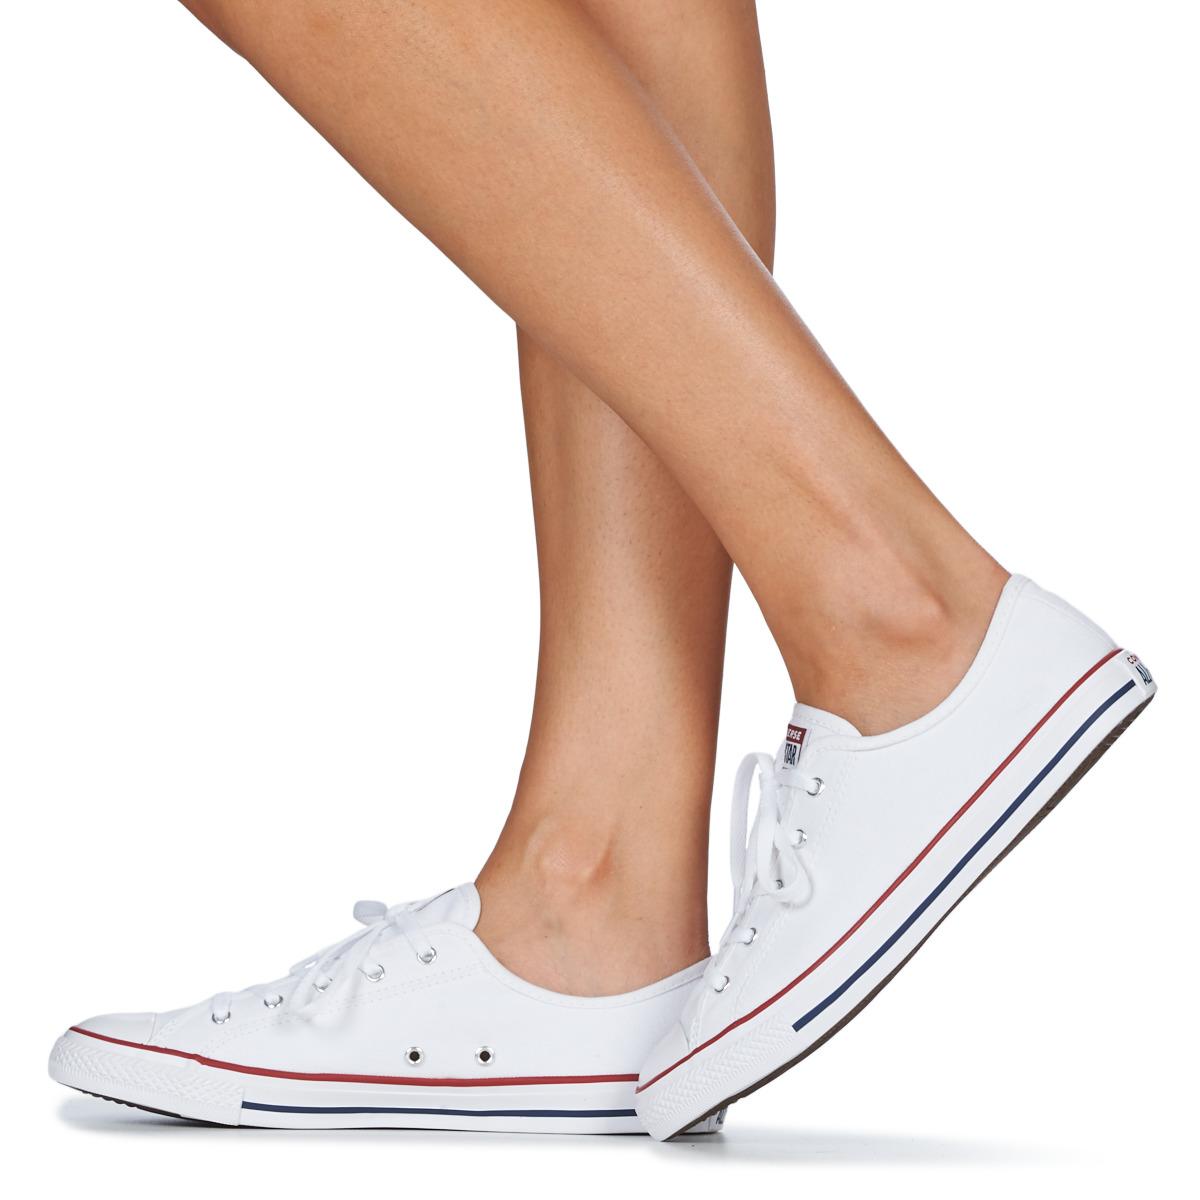 converse chuck taylor all star dainty ox womens classic shoes